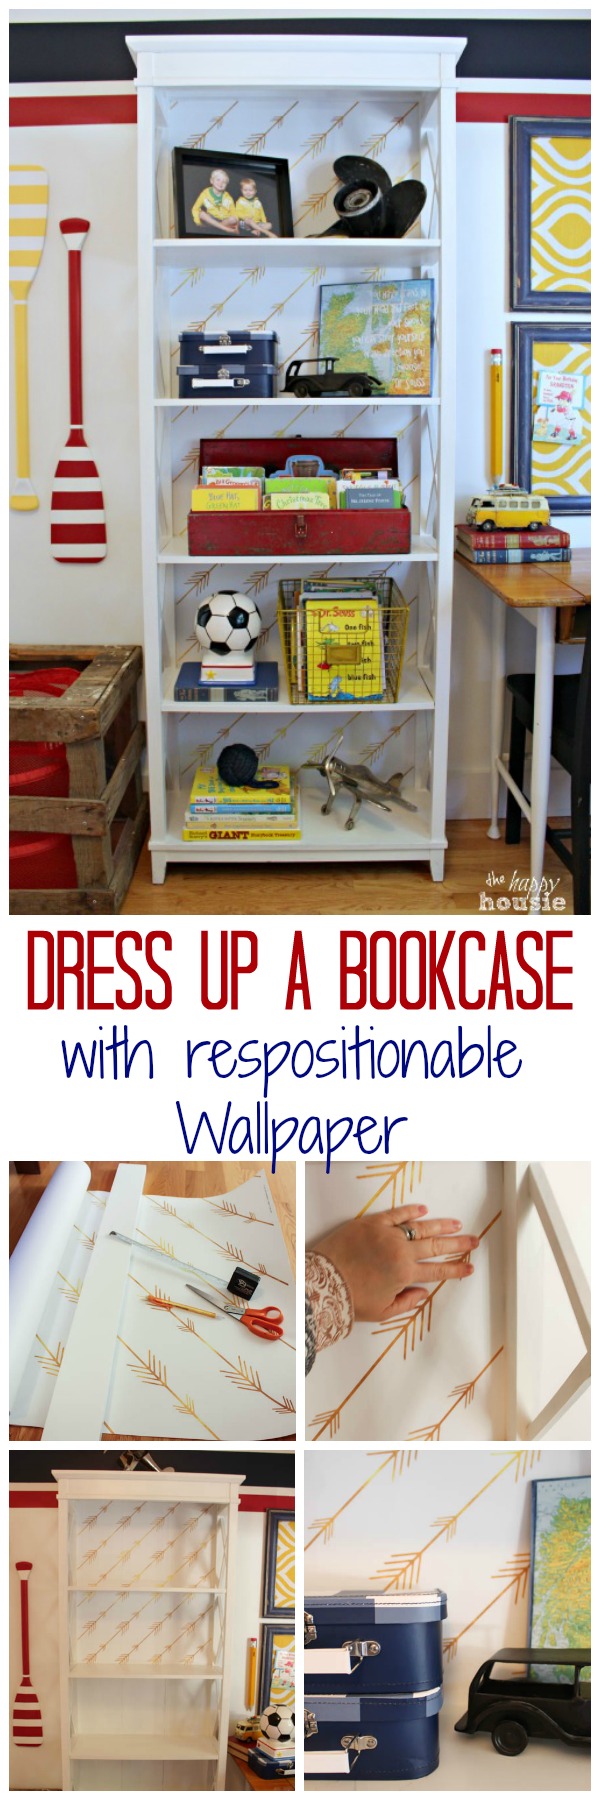 Dress up a bookcase poster.